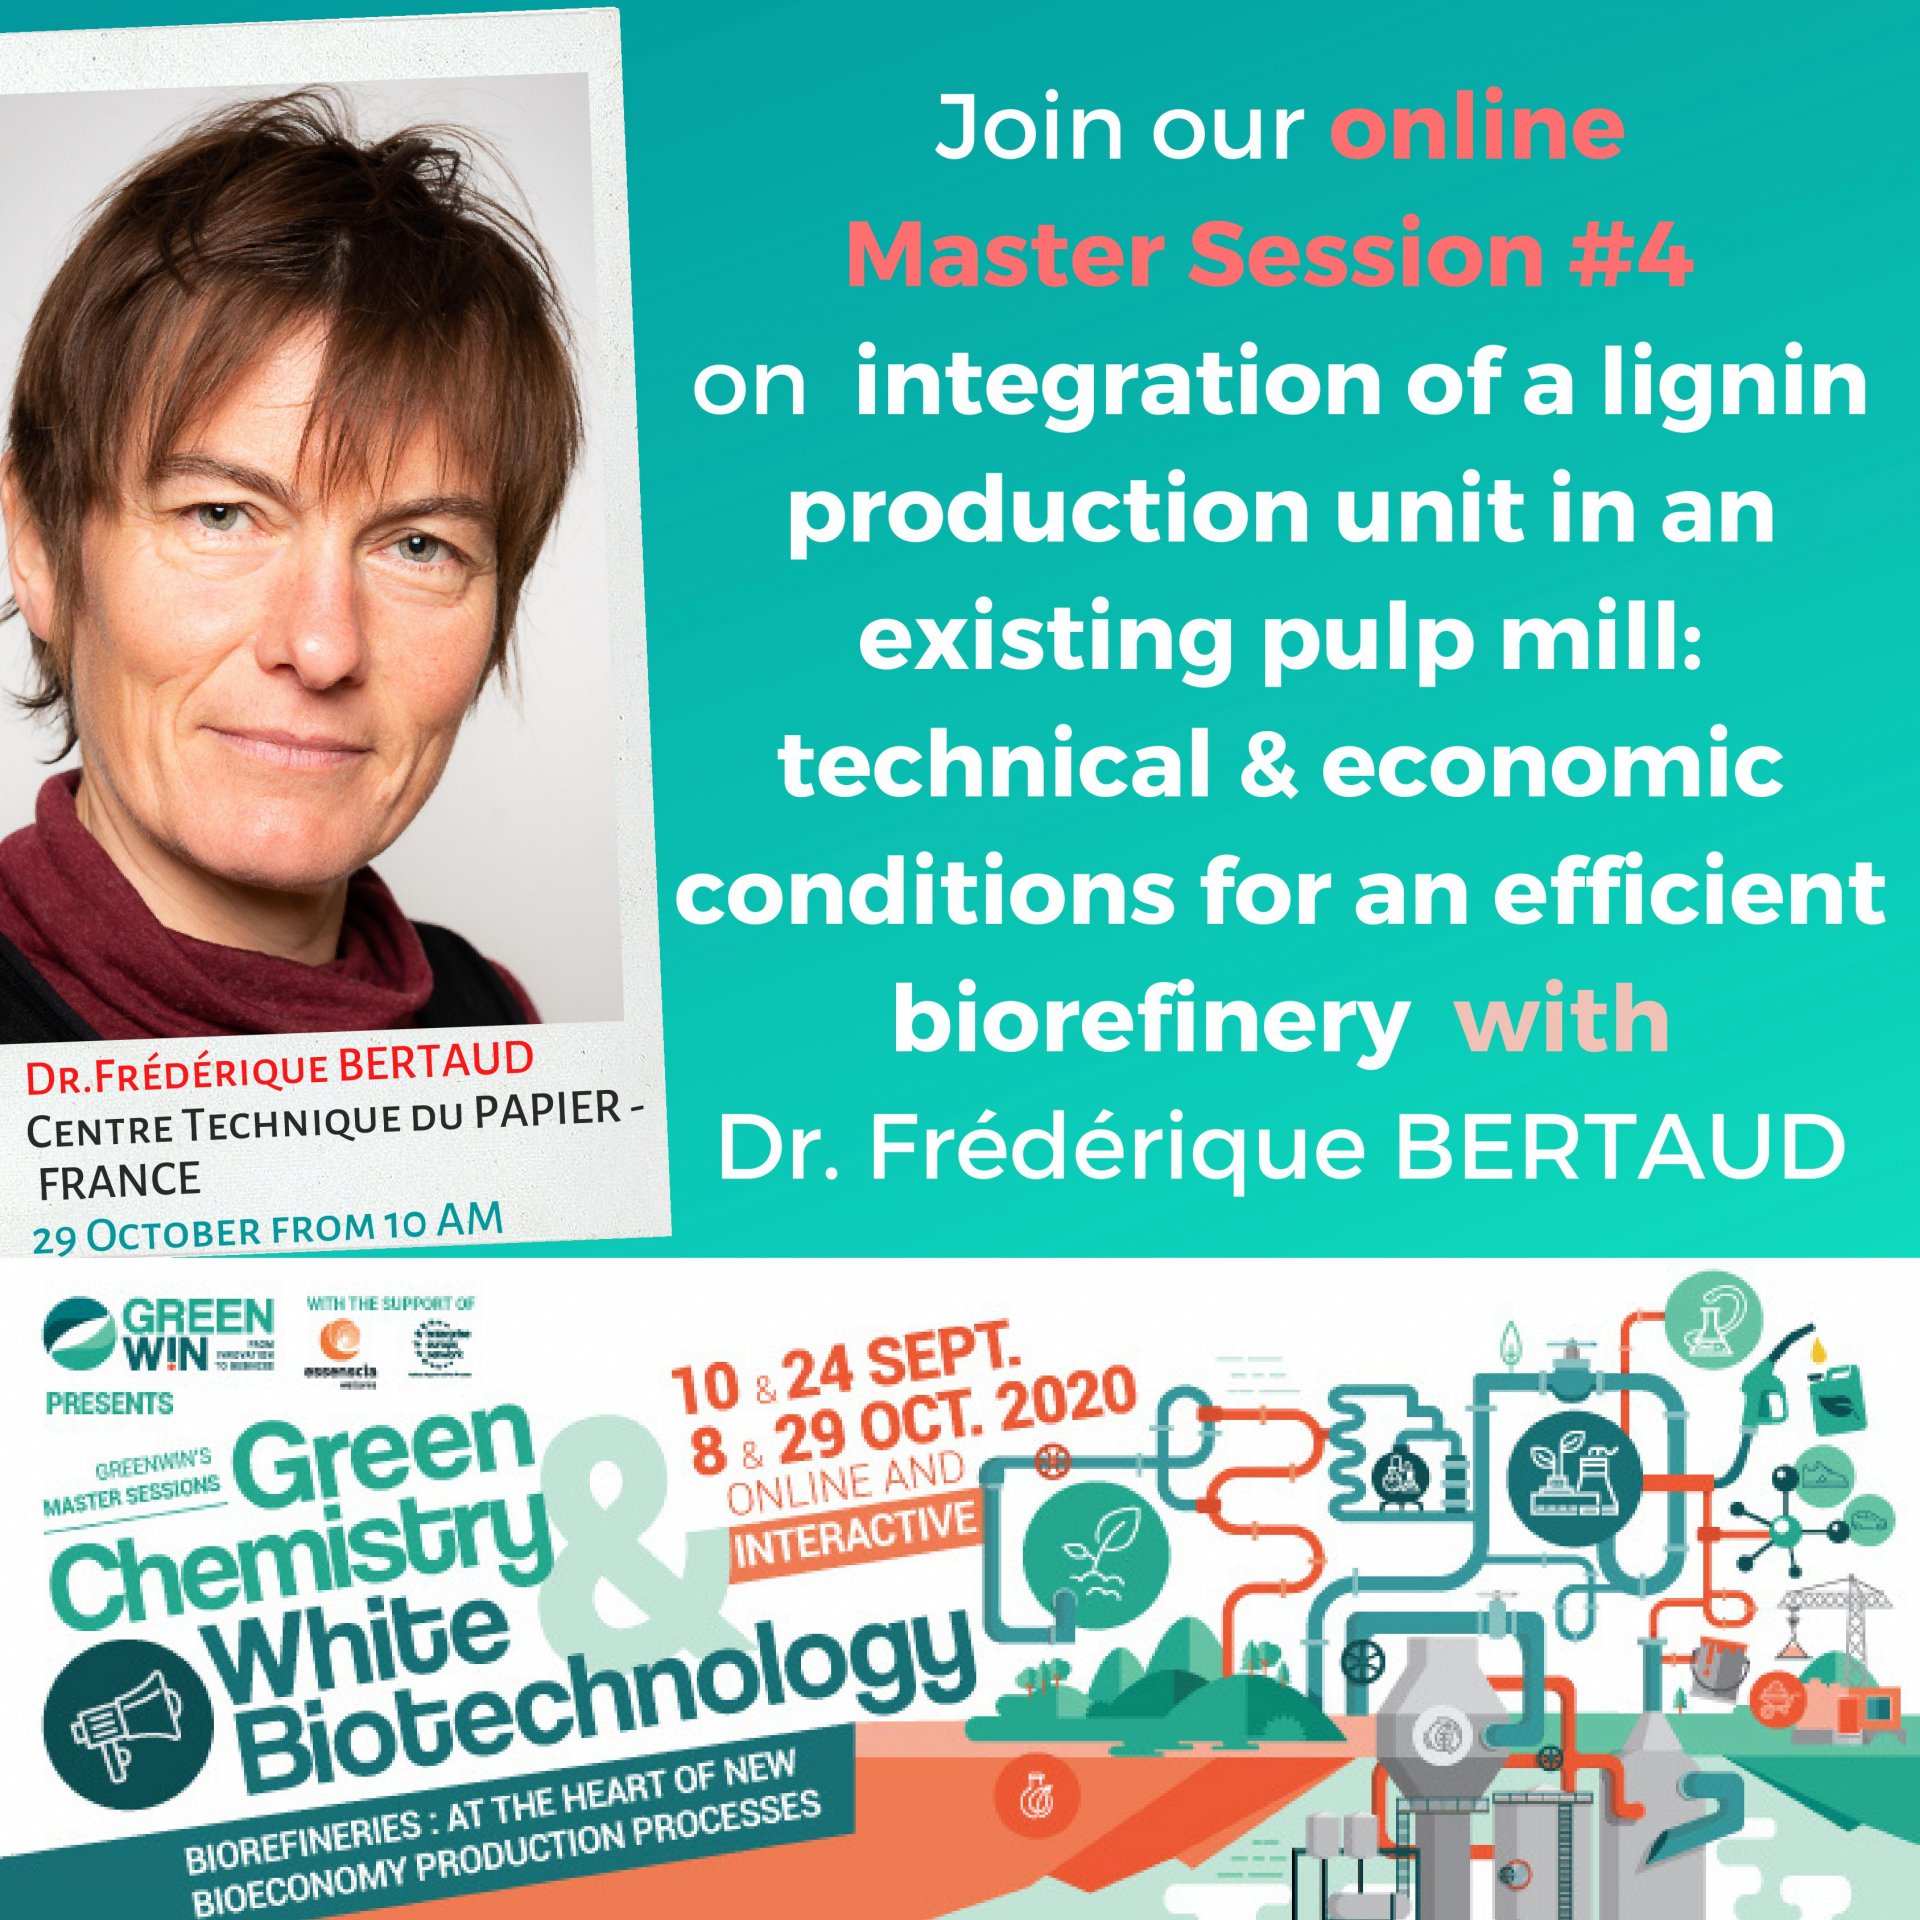 Meet Dr Frédérique BERTAUD, from Centre Technique du Papier - France, at our online Master Session #4 on 29 October from 10AM